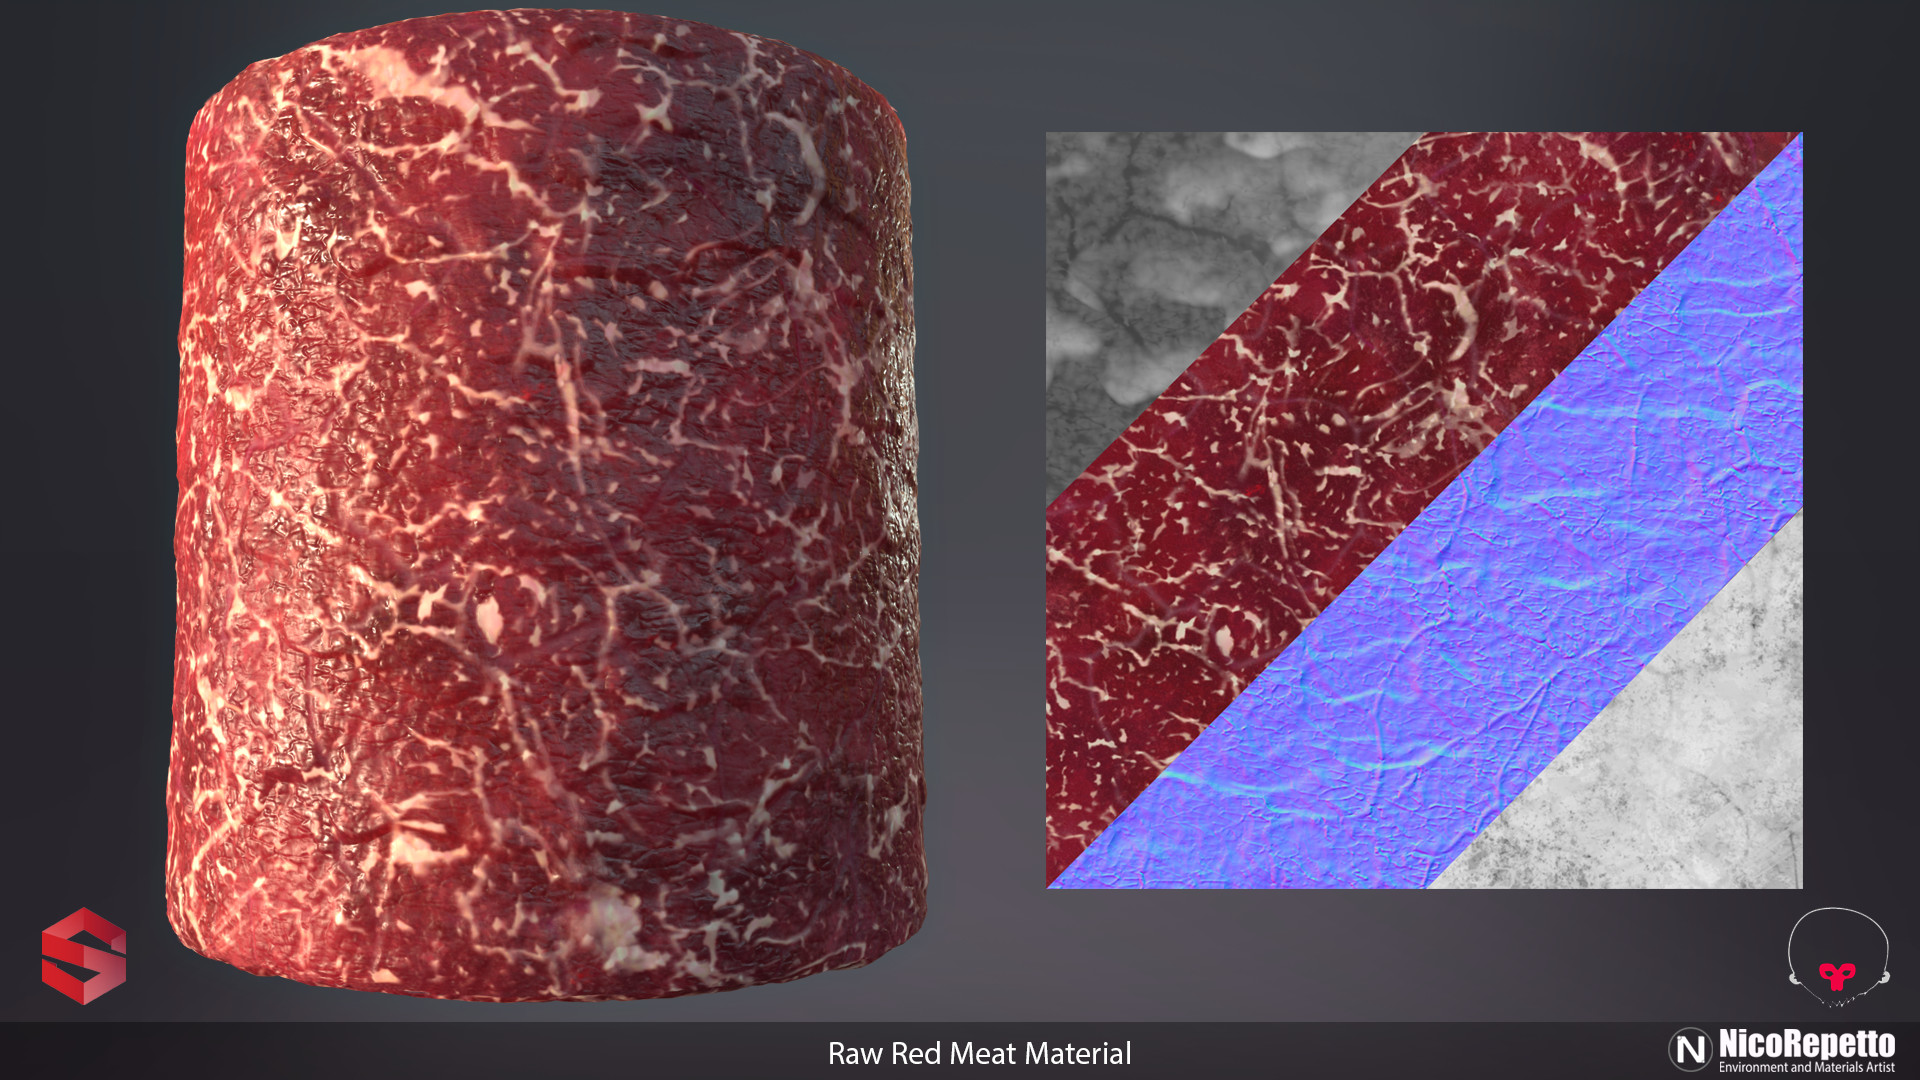 Nicolas Repetto - Raw Red Meat Material